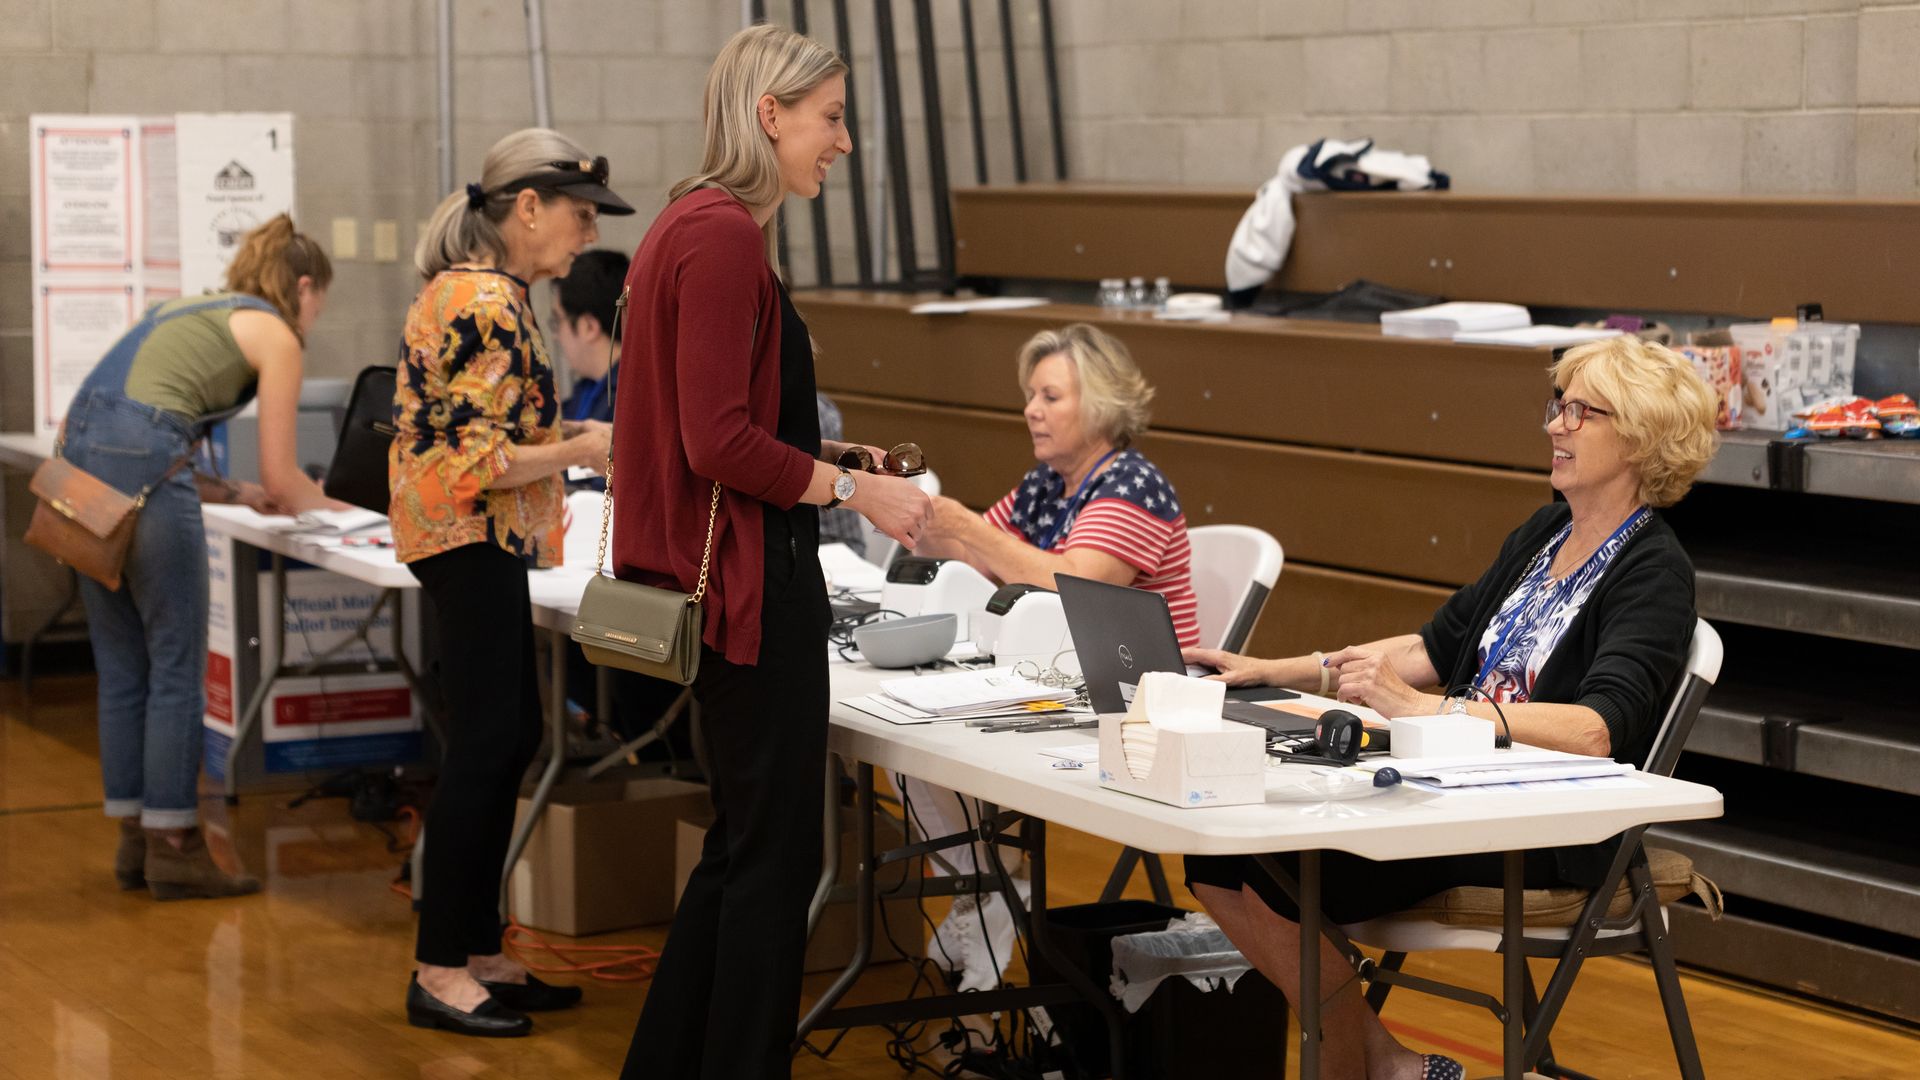  Voters cast their ballots at Reno High School for the Nevada primary on June 14, 2022 in Reno, Nevada.